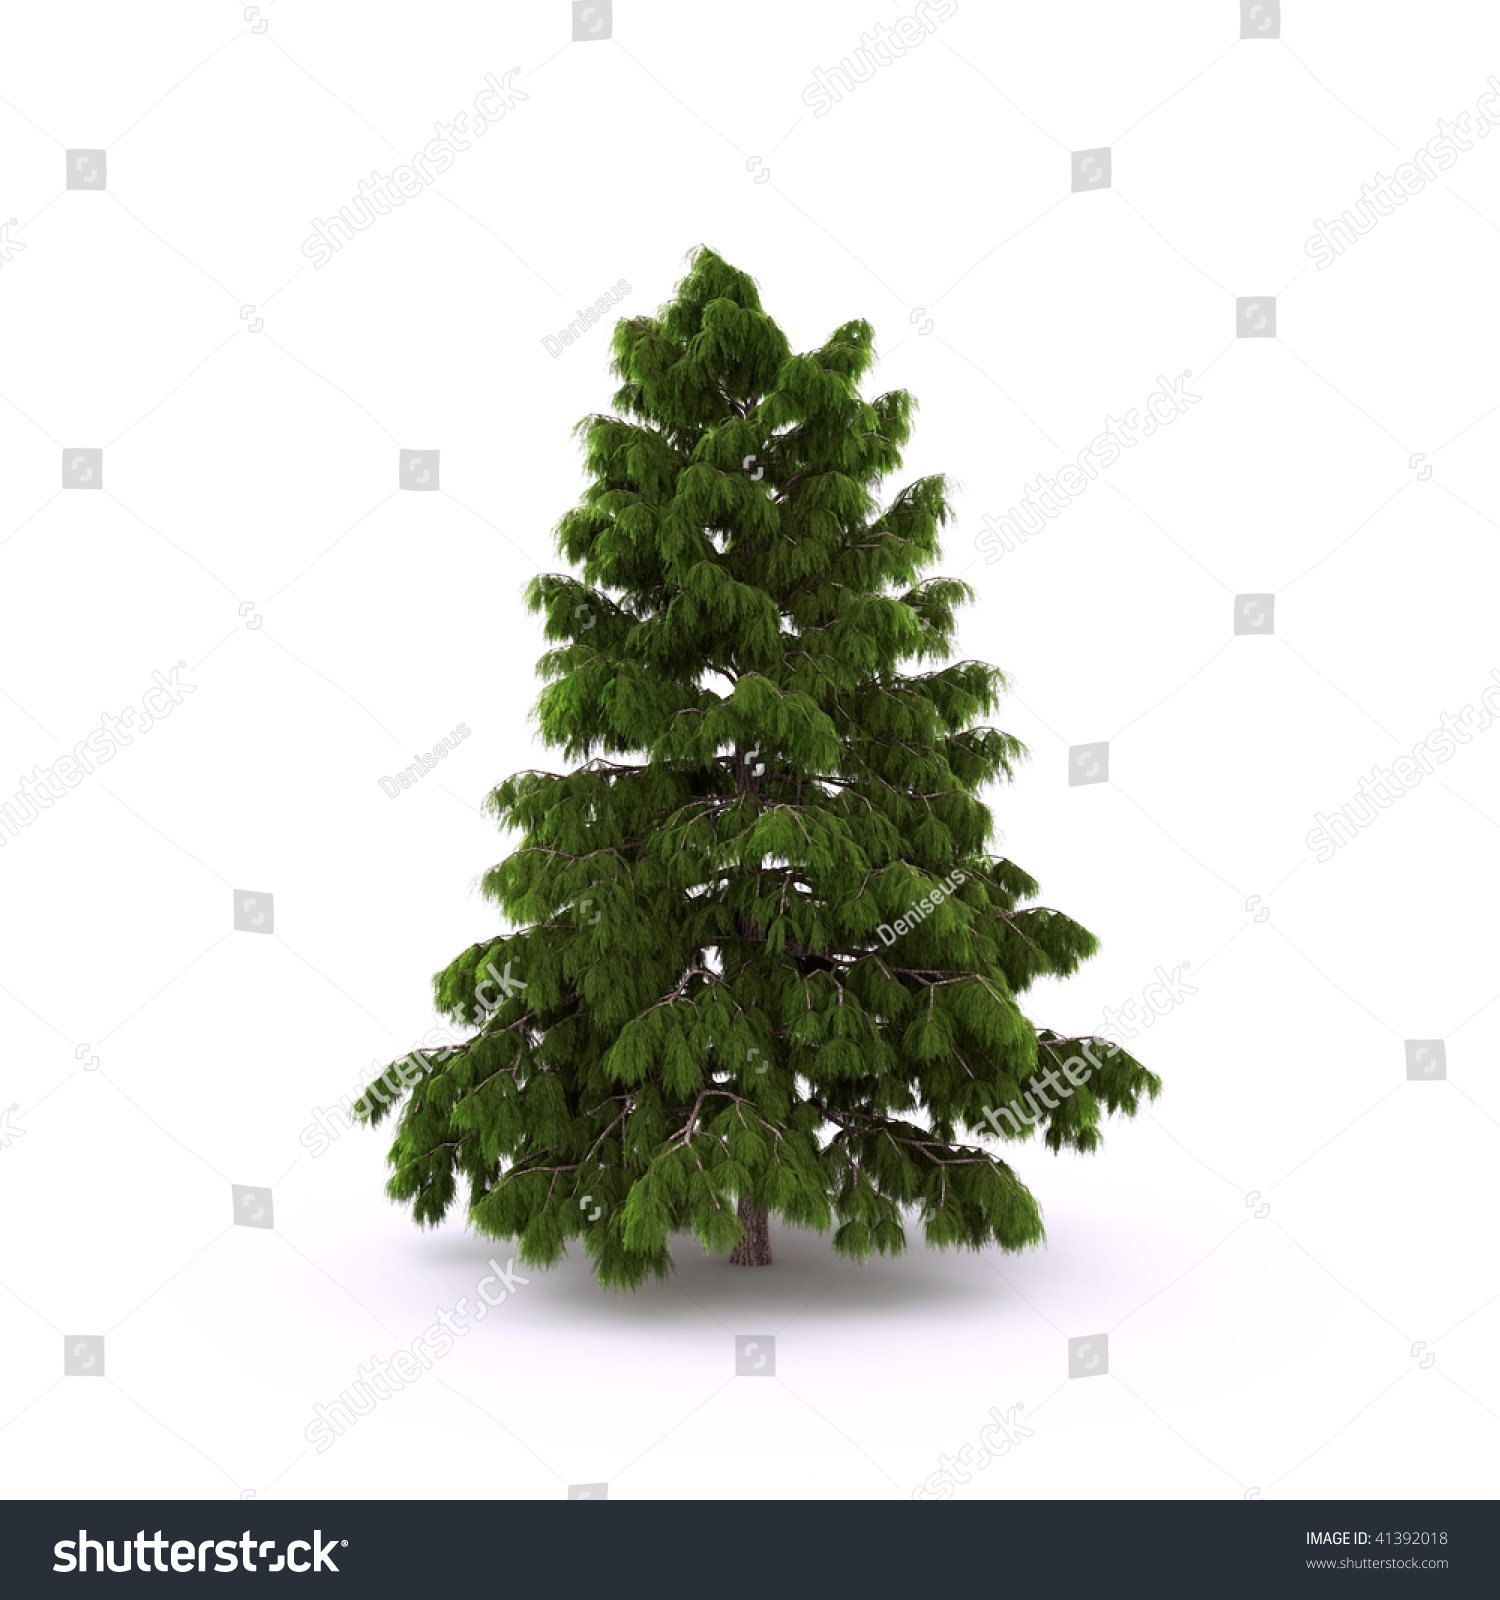 Pine on the white background #41392018